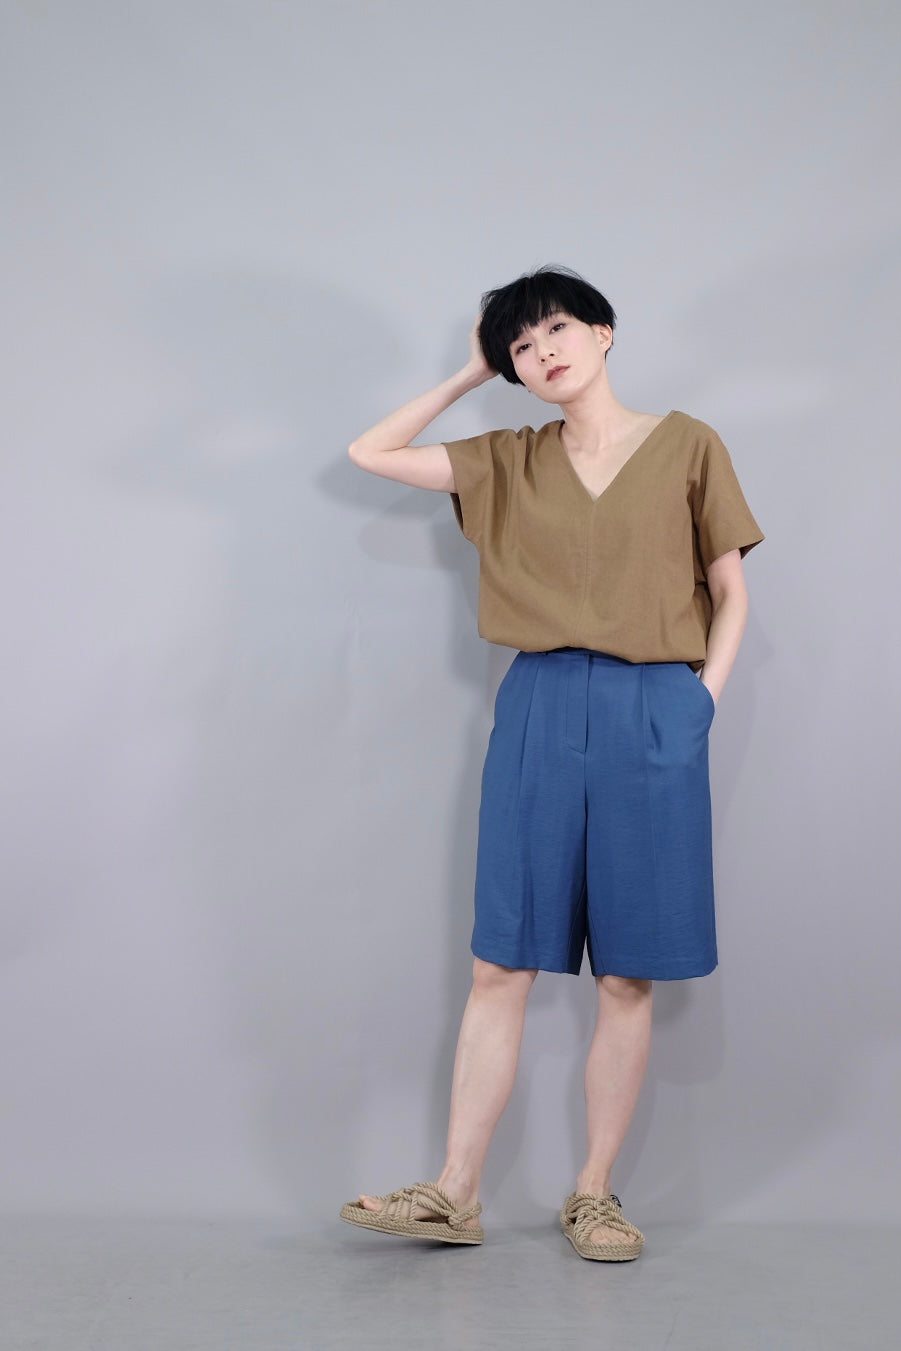 Pleated knee-length shorts - 3 colours